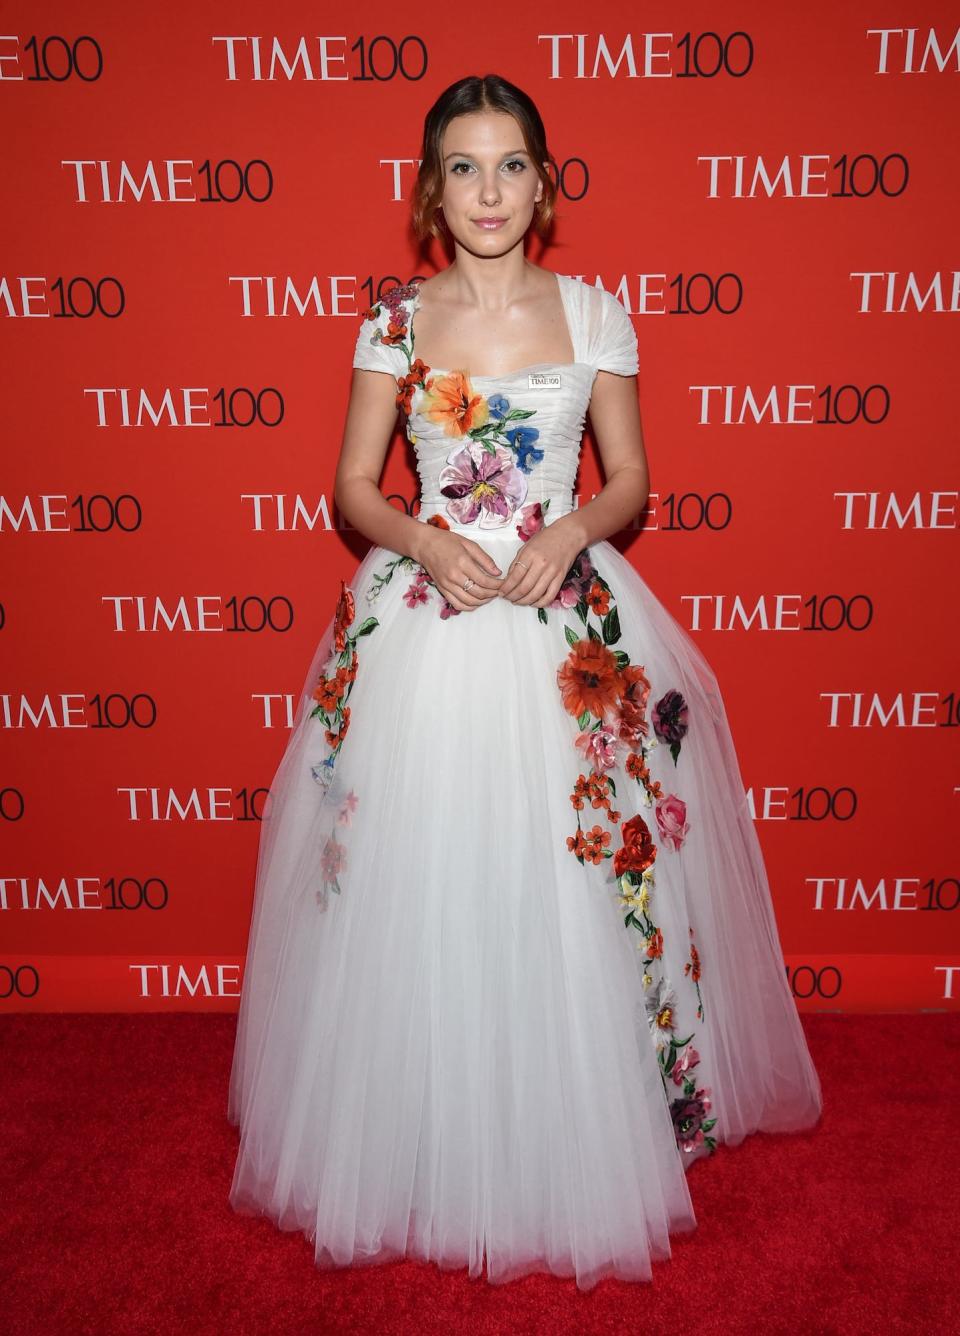 Millie Bobby Brown at the Time 100 Gala in New York City on April 24, 2018.